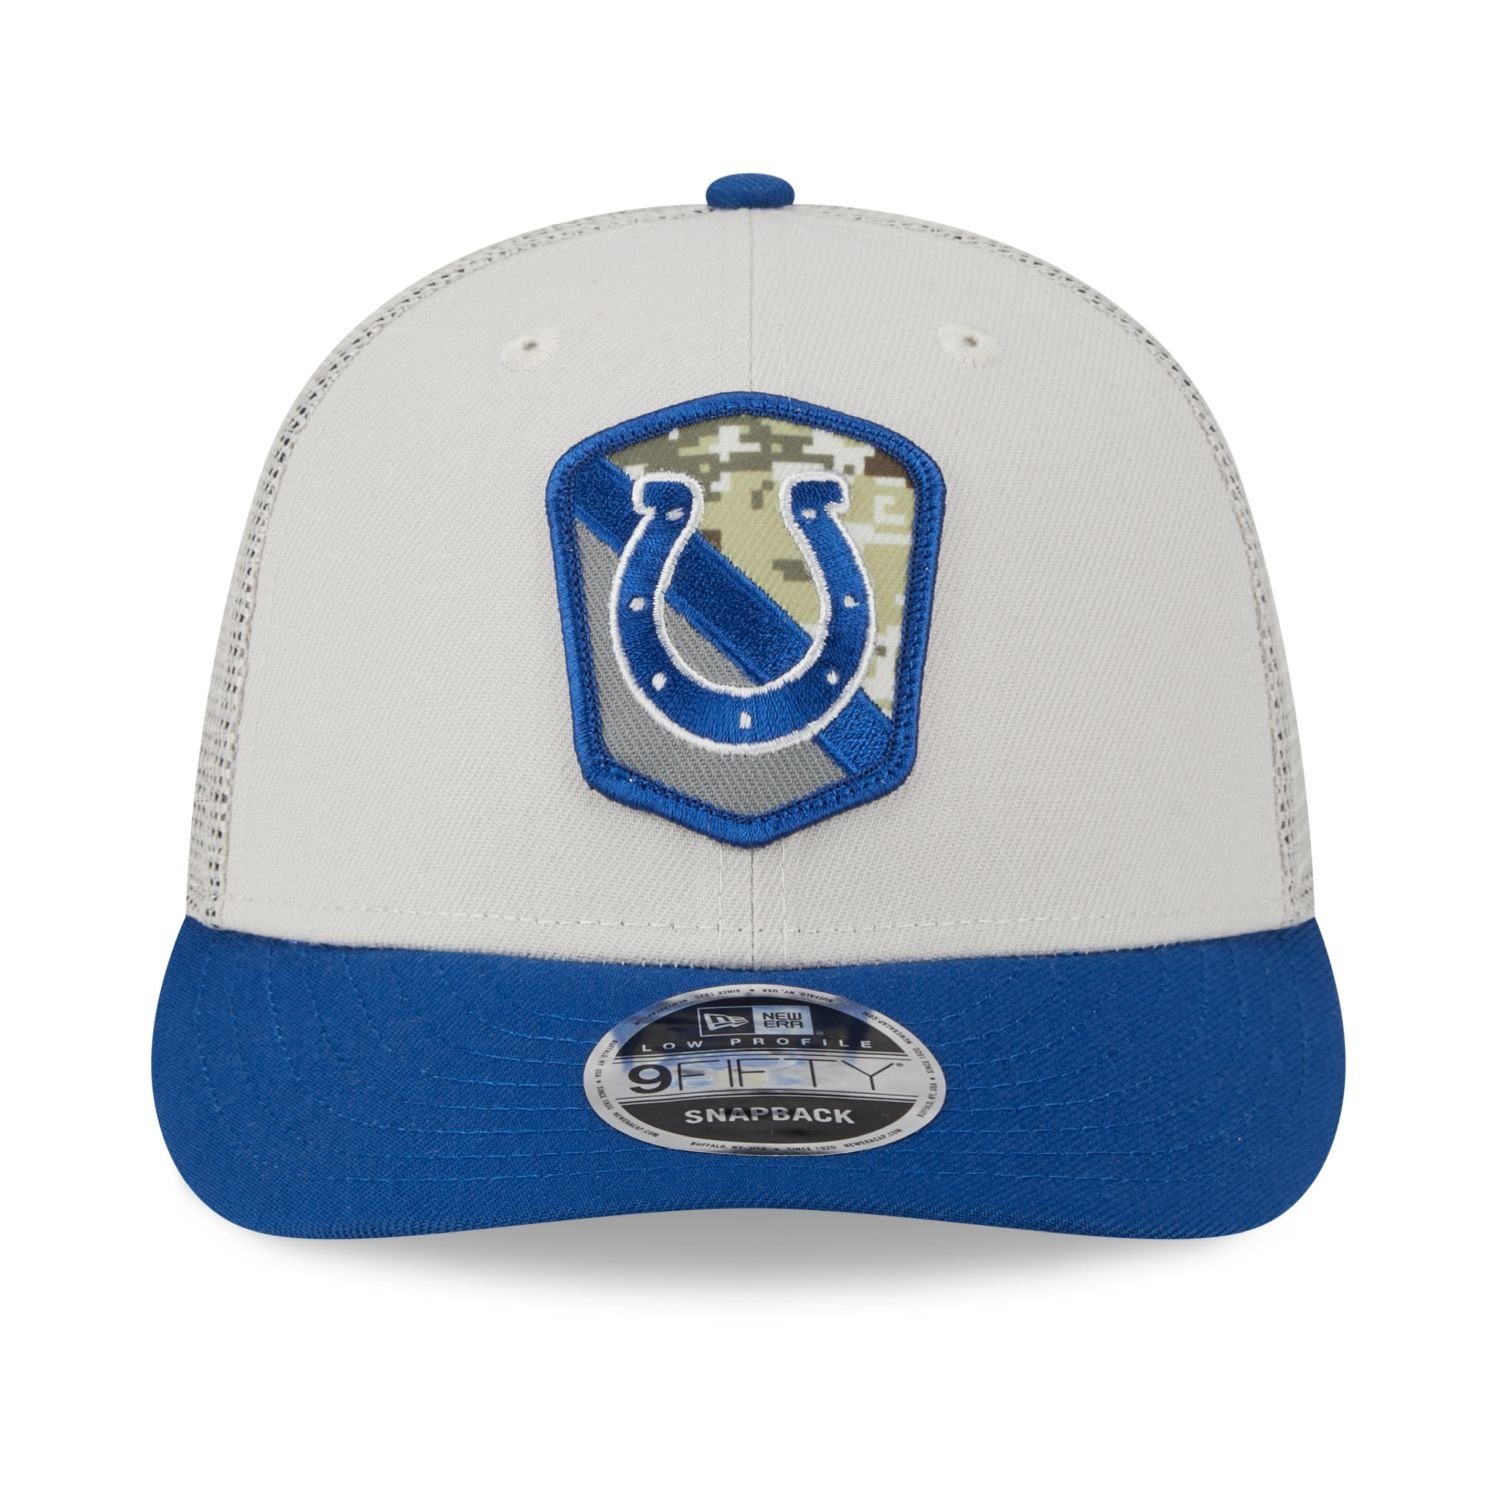 New Era Snapback Cap 9Fifty Indianapolis Profile Colts Salute Service NFL Low Snap to